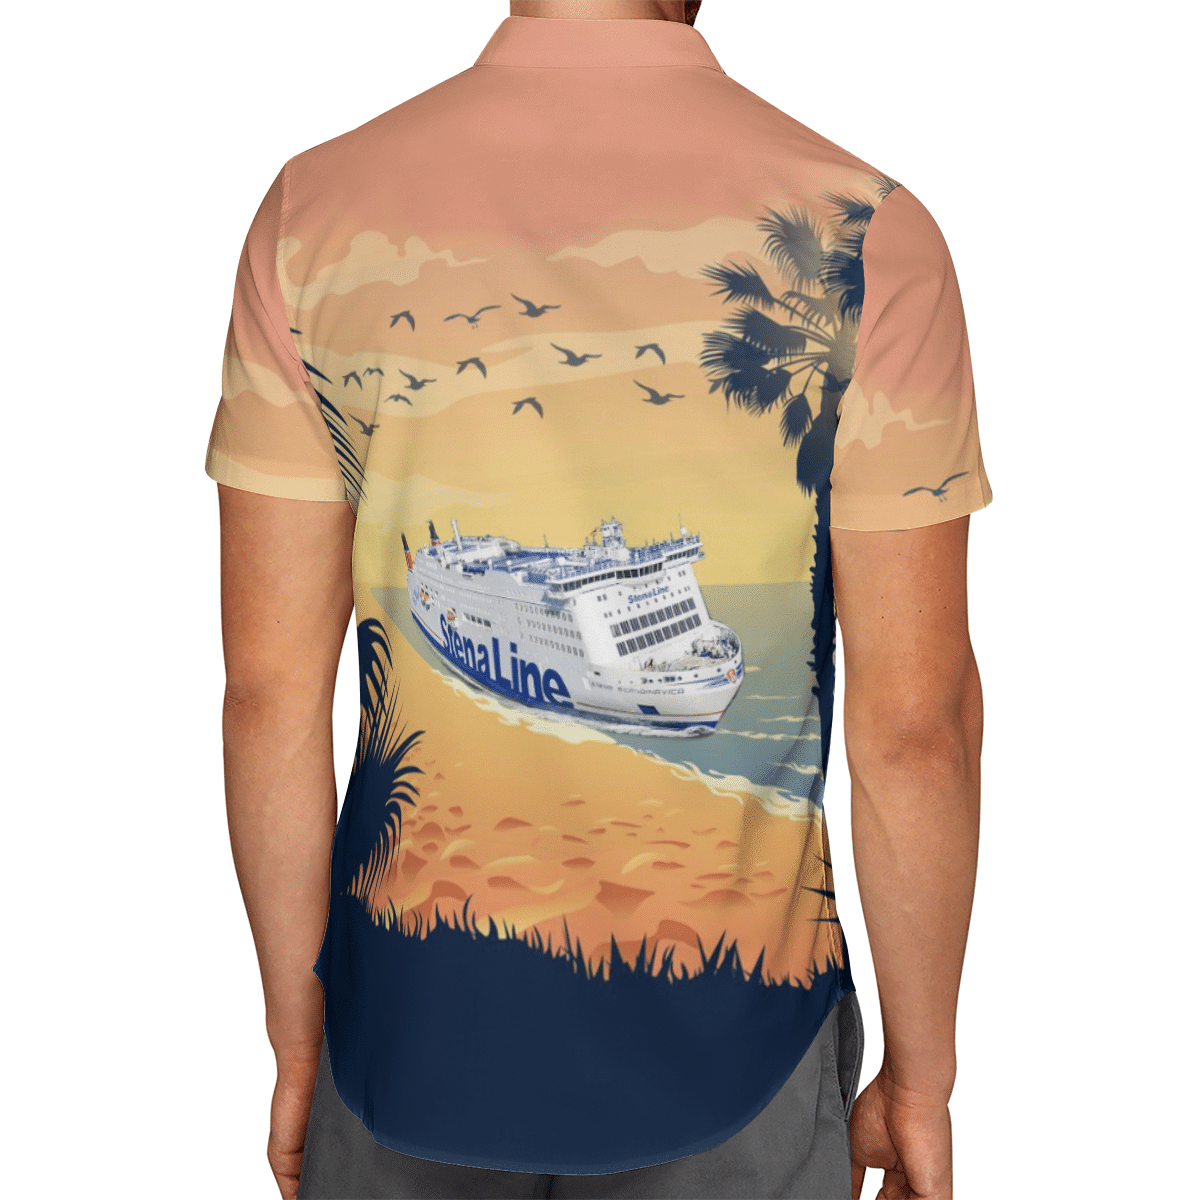 Going to the beach with a quality shirt 114